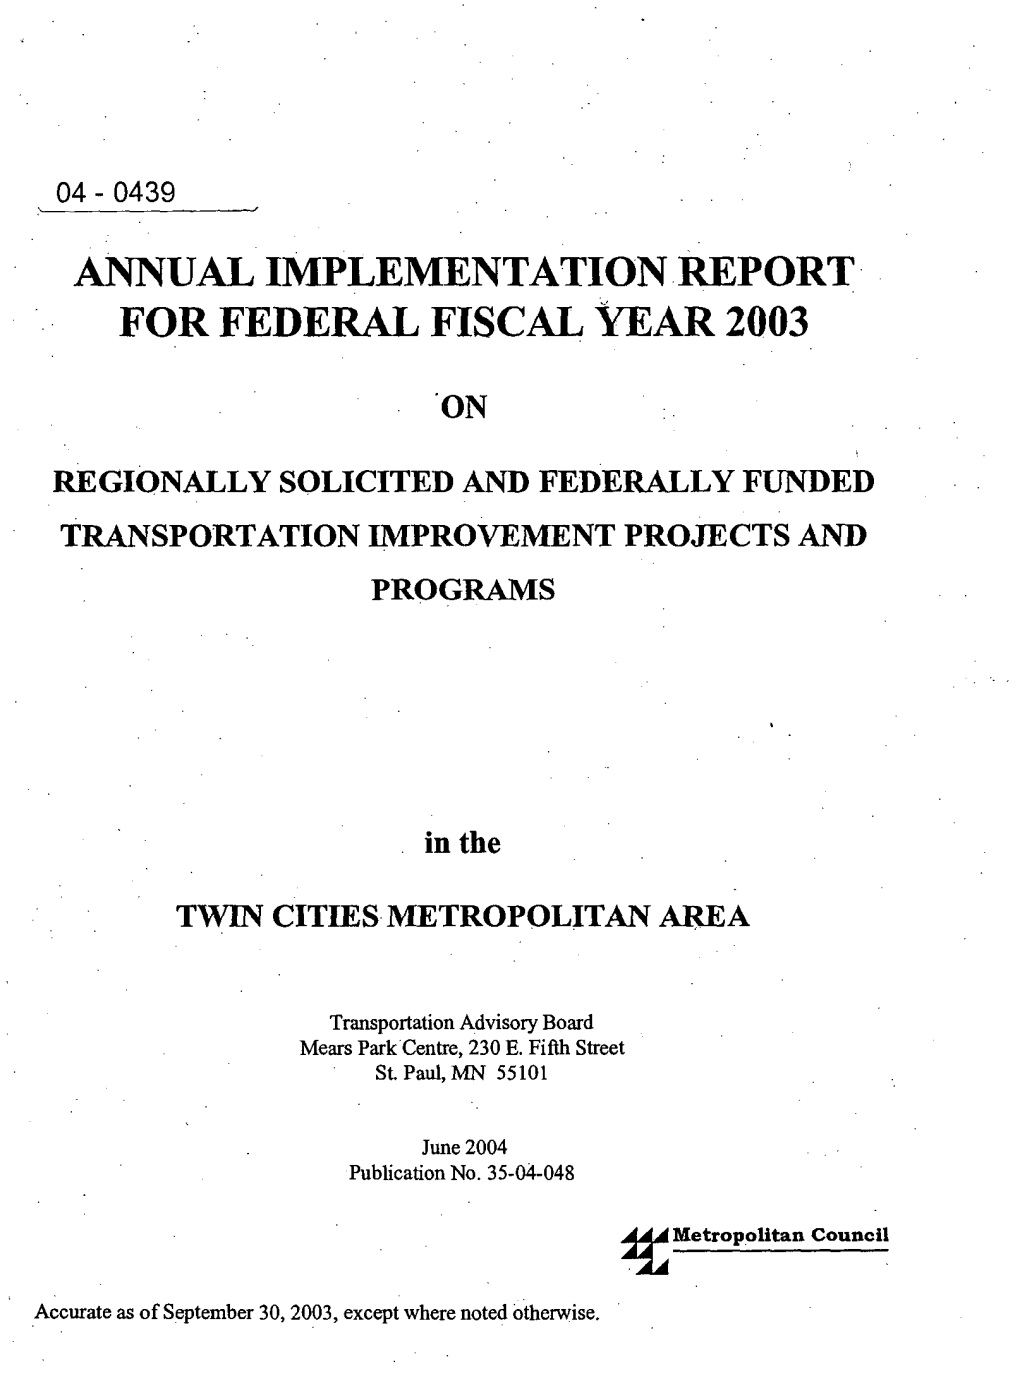 For Federal Fiscal Year 2003